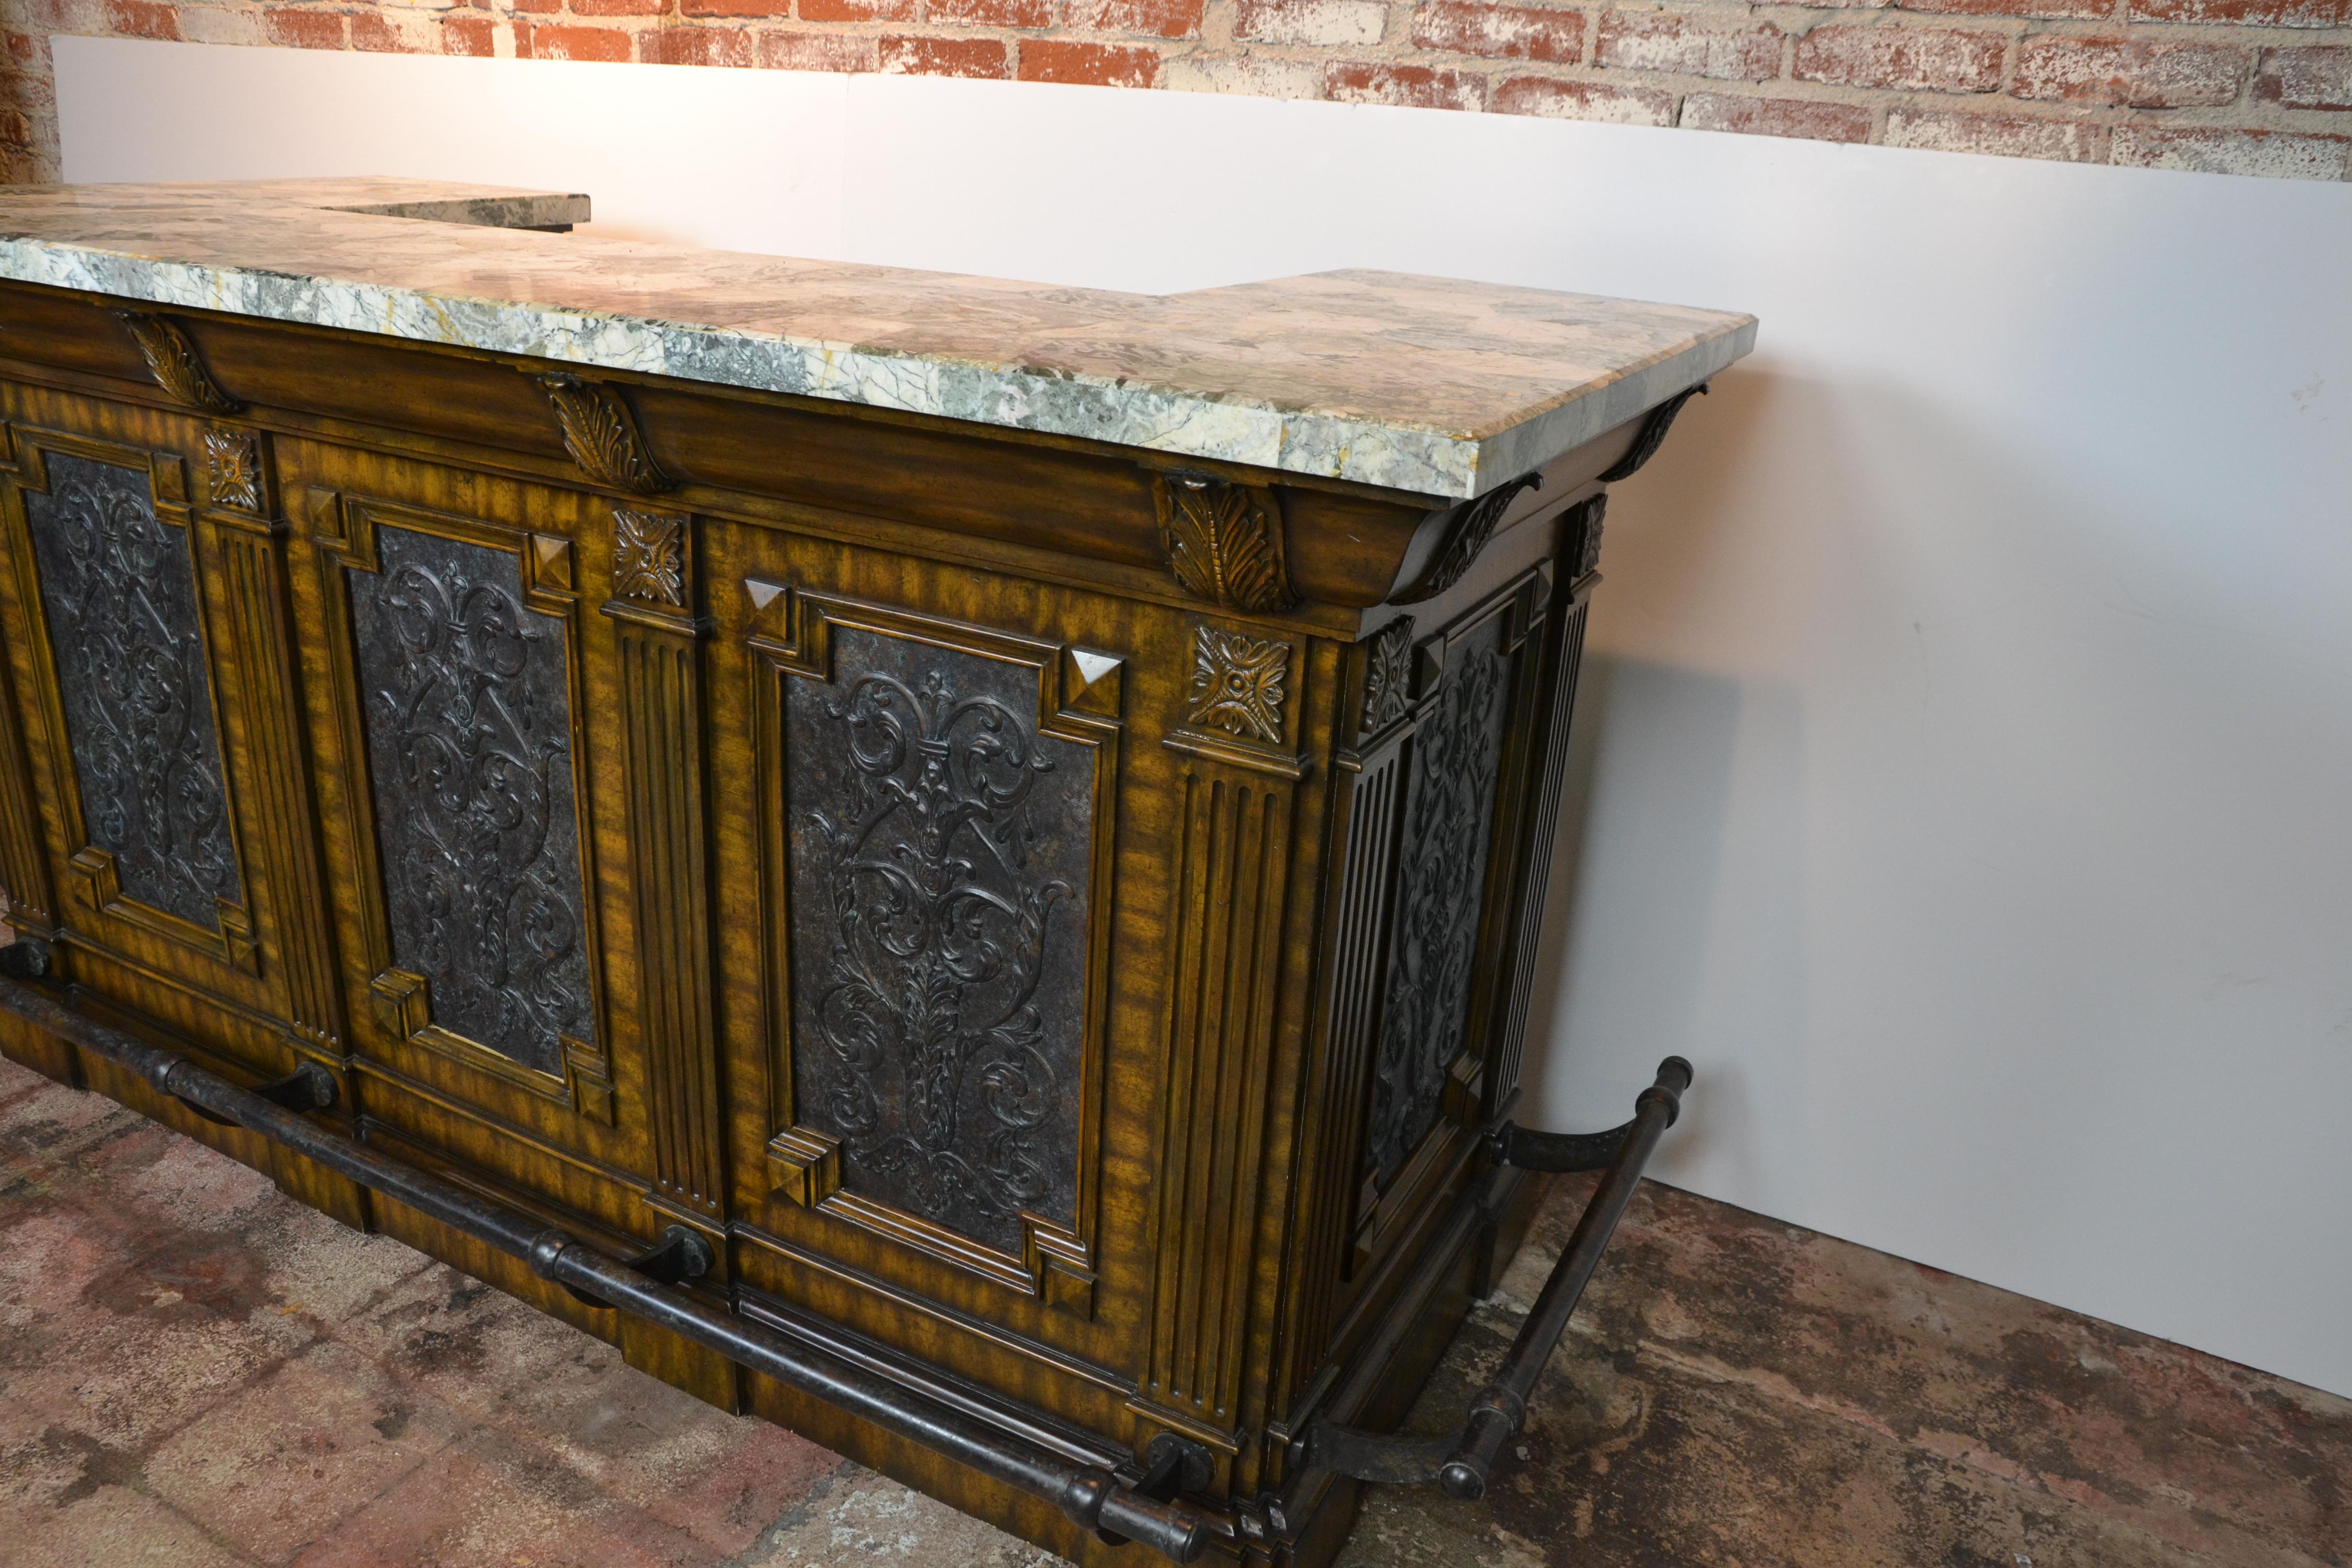 A vintage mahogany cocktail bar of really good quality. Pressed metal panels to the front and sides, decorated with Acanthus leaf designs. Panels have an aged patina. Foot rails are patinated like aged bronze. Drawers and cupboards to the reverse